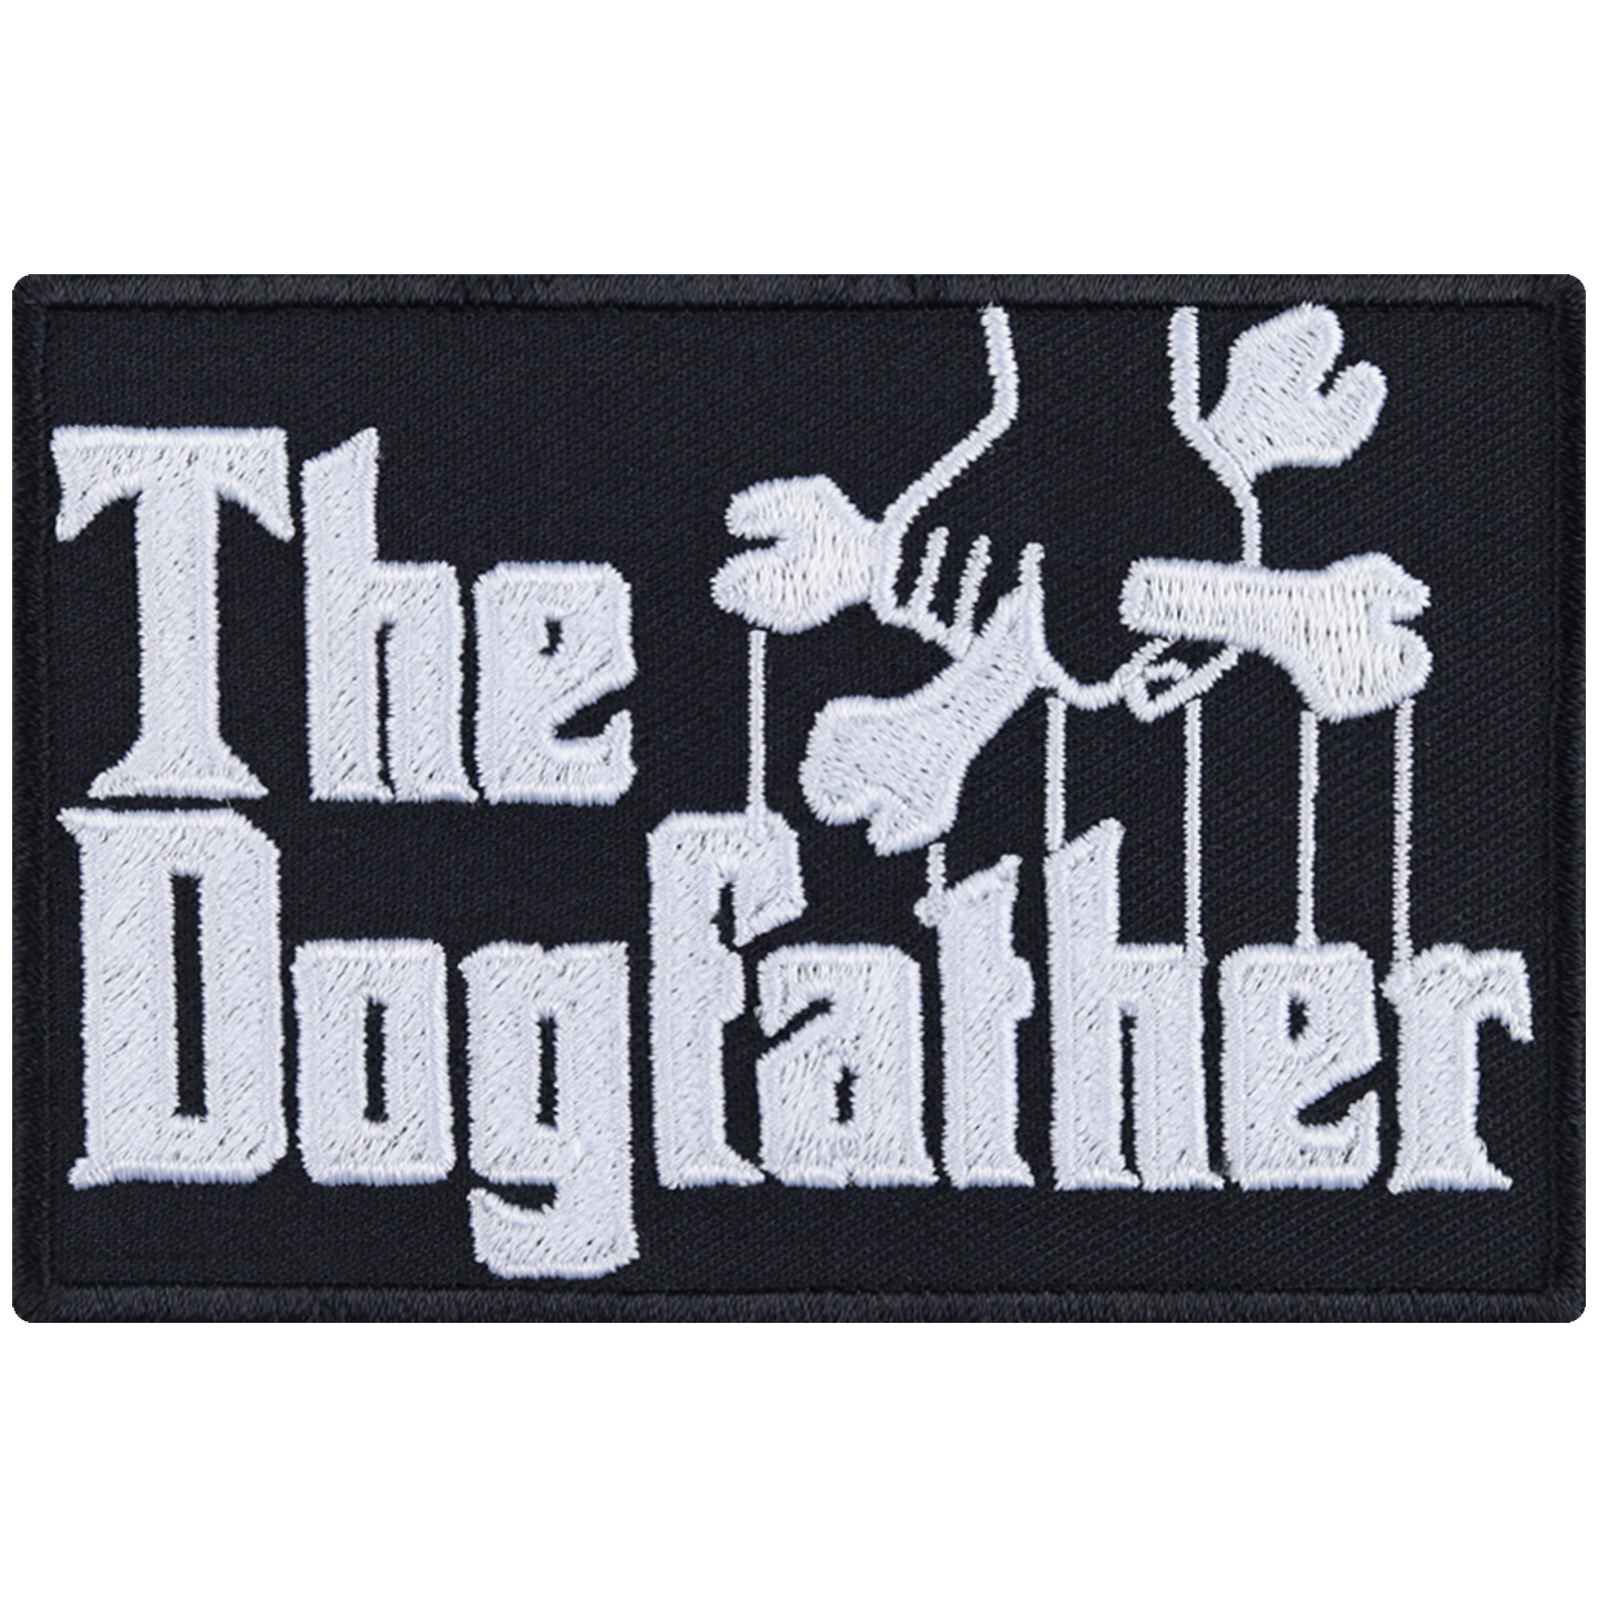 The dogfather - Patch